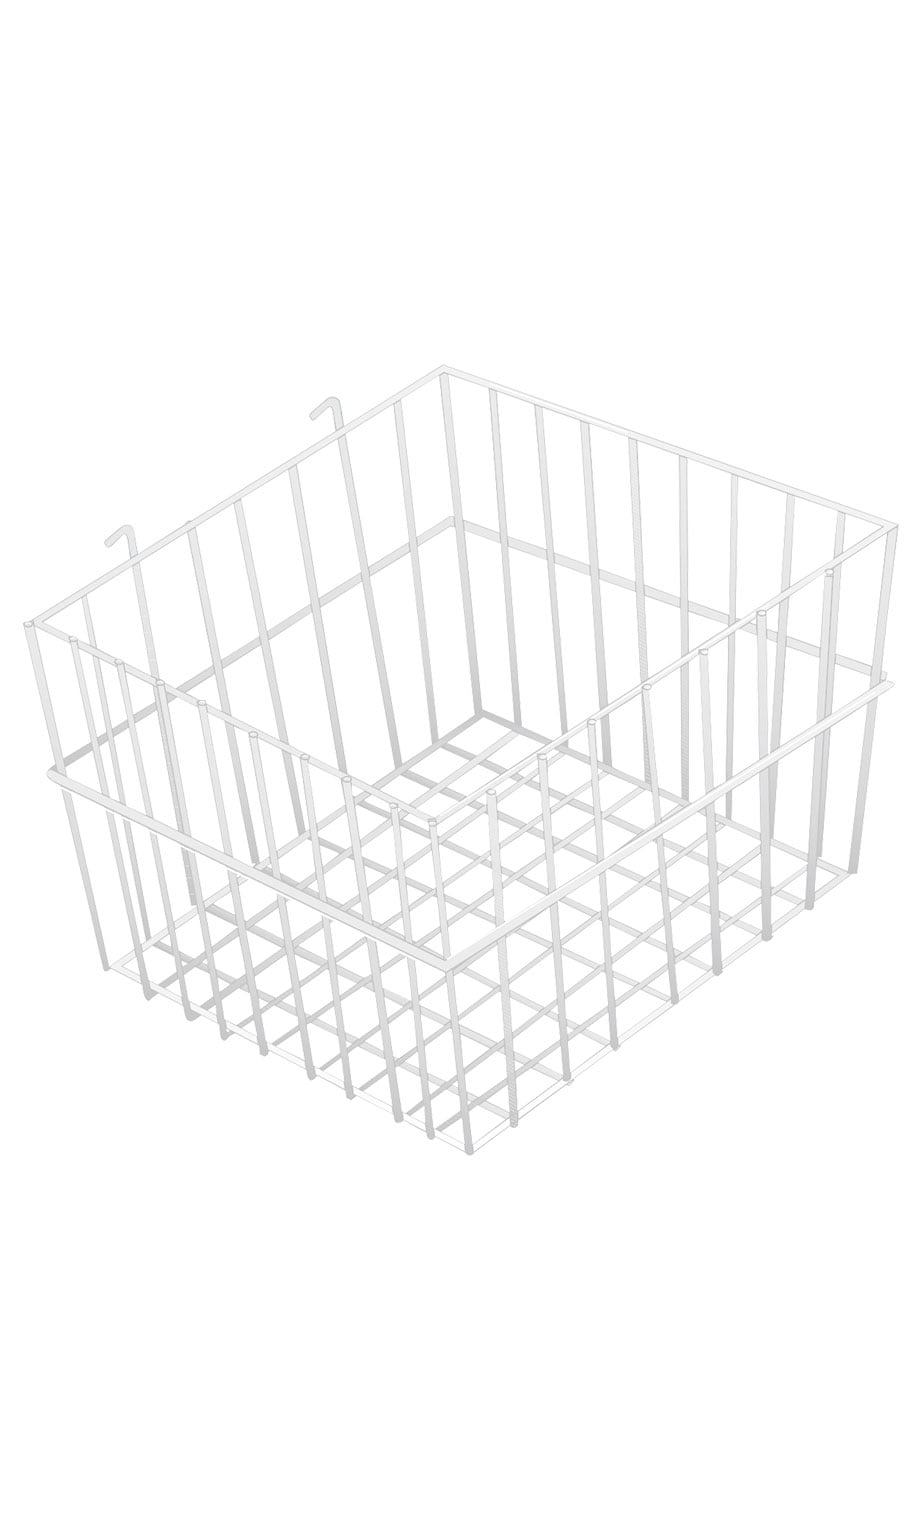 Copper Tone Metal Wire Mesh Wall Mounted Mail Sorter Storage Baskets with Scrollwork Design Set of 2